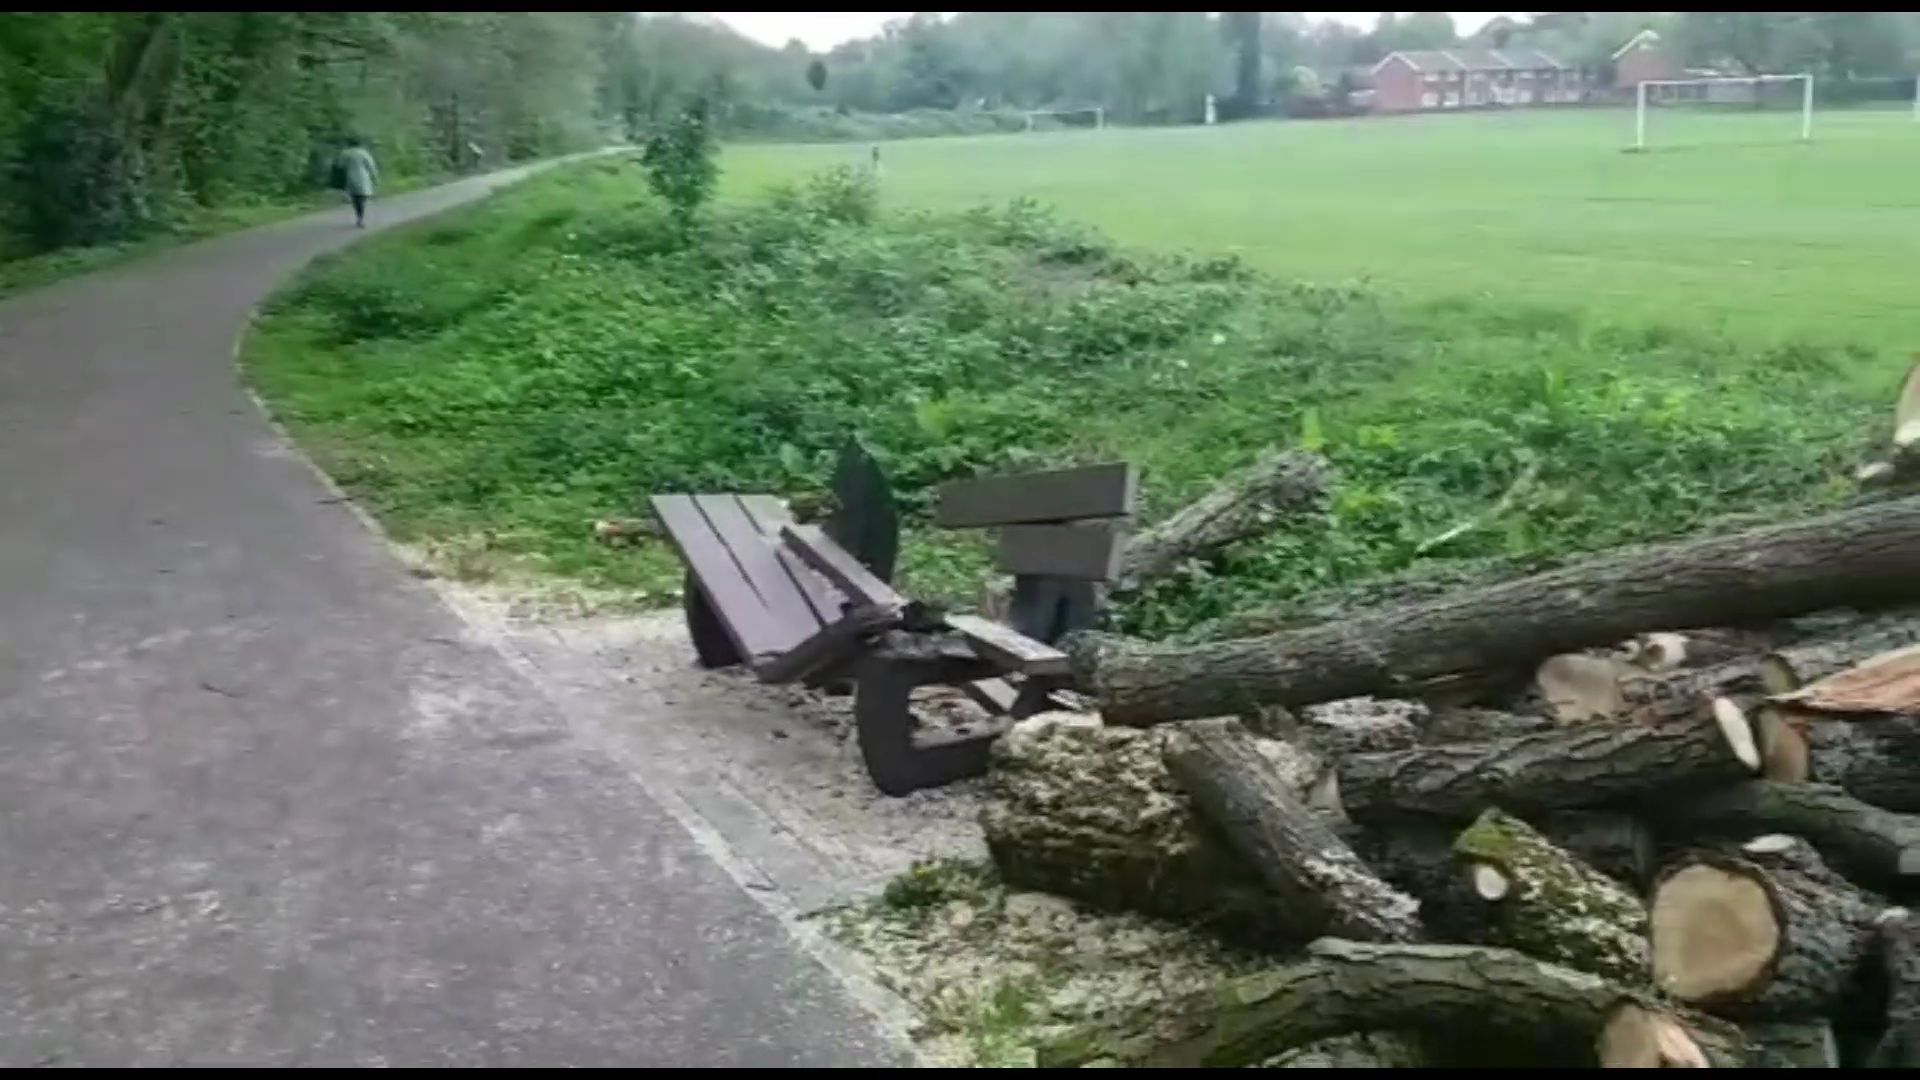 A bench crushed by branches that were cut off a tree